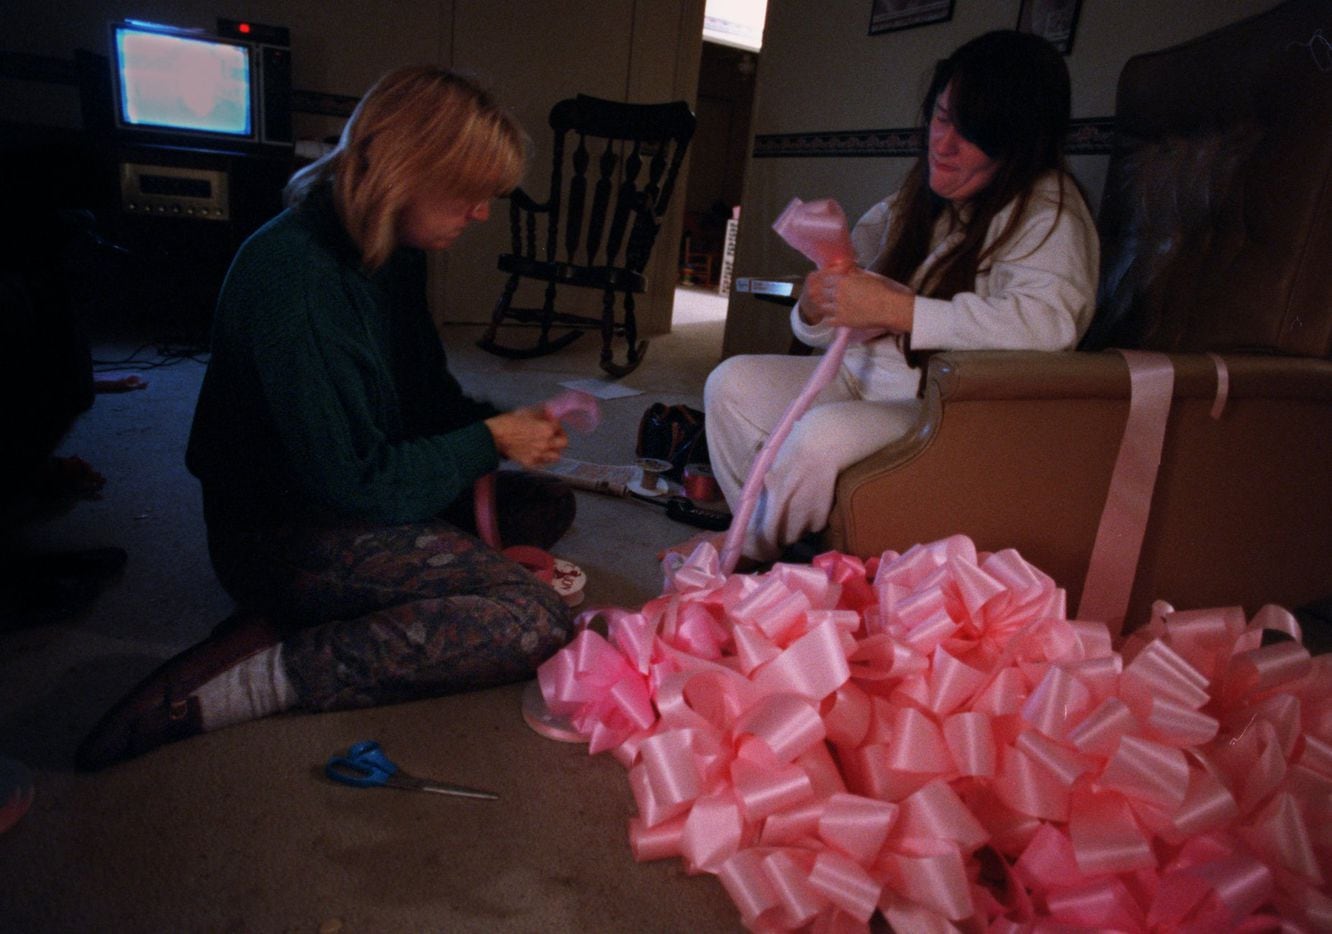 Barbara Dyess and Tammy Zimmerman make pink bows at 3 a.m. on Jan. 18, 1996 for Amber Hagerman as they await word on the identity of a child's body which had been found earlier that evening. Zimmerman, who was crying as she tied the bows, said they were  going to continue despite the outcome of the news.